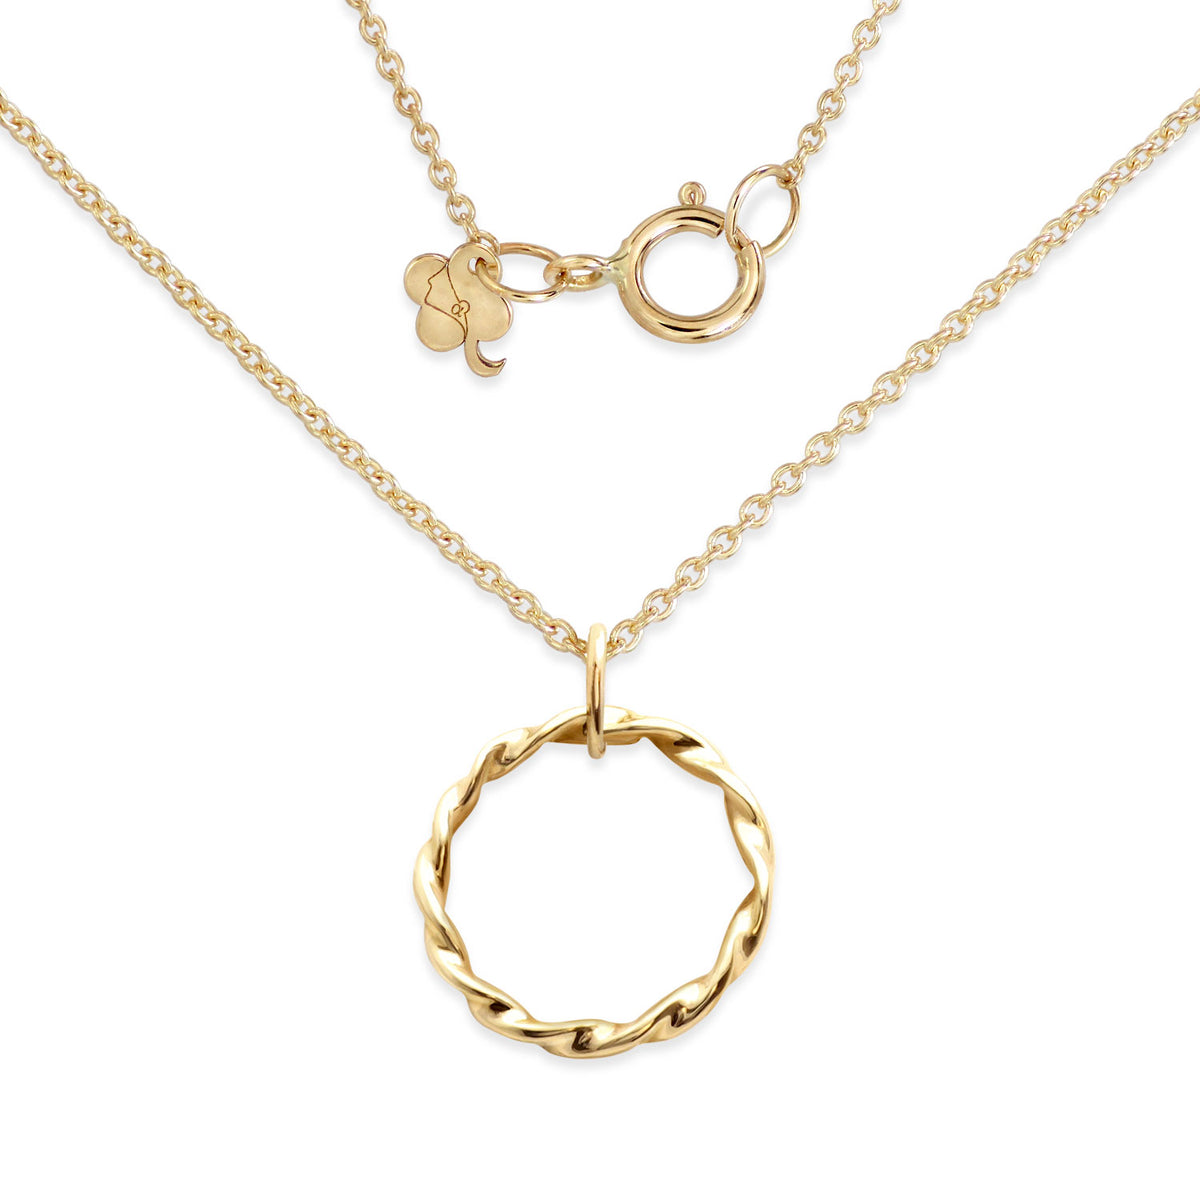 Golden Twisted Ring Diamond Necklace